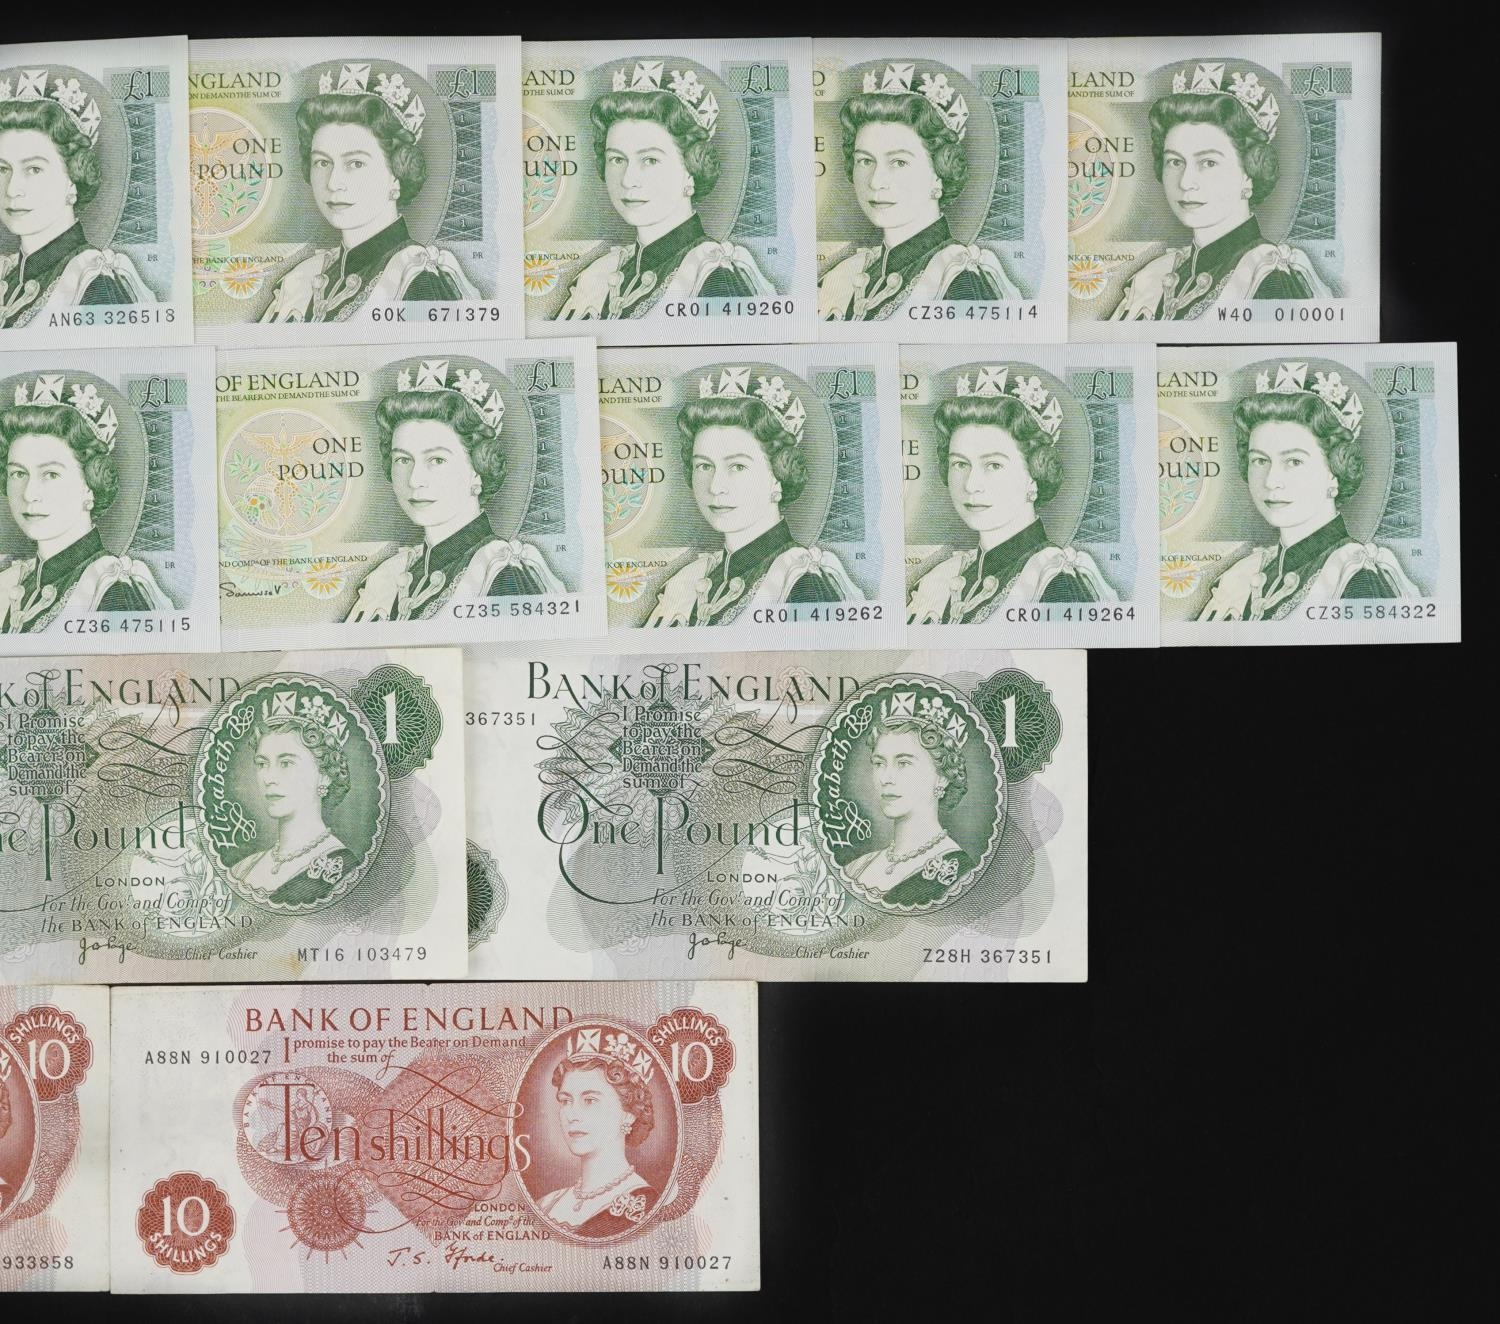 Elizabeth II Bank of England banknotes, various Chief Cashiers, including one pound note with serial - Image 3 of 3